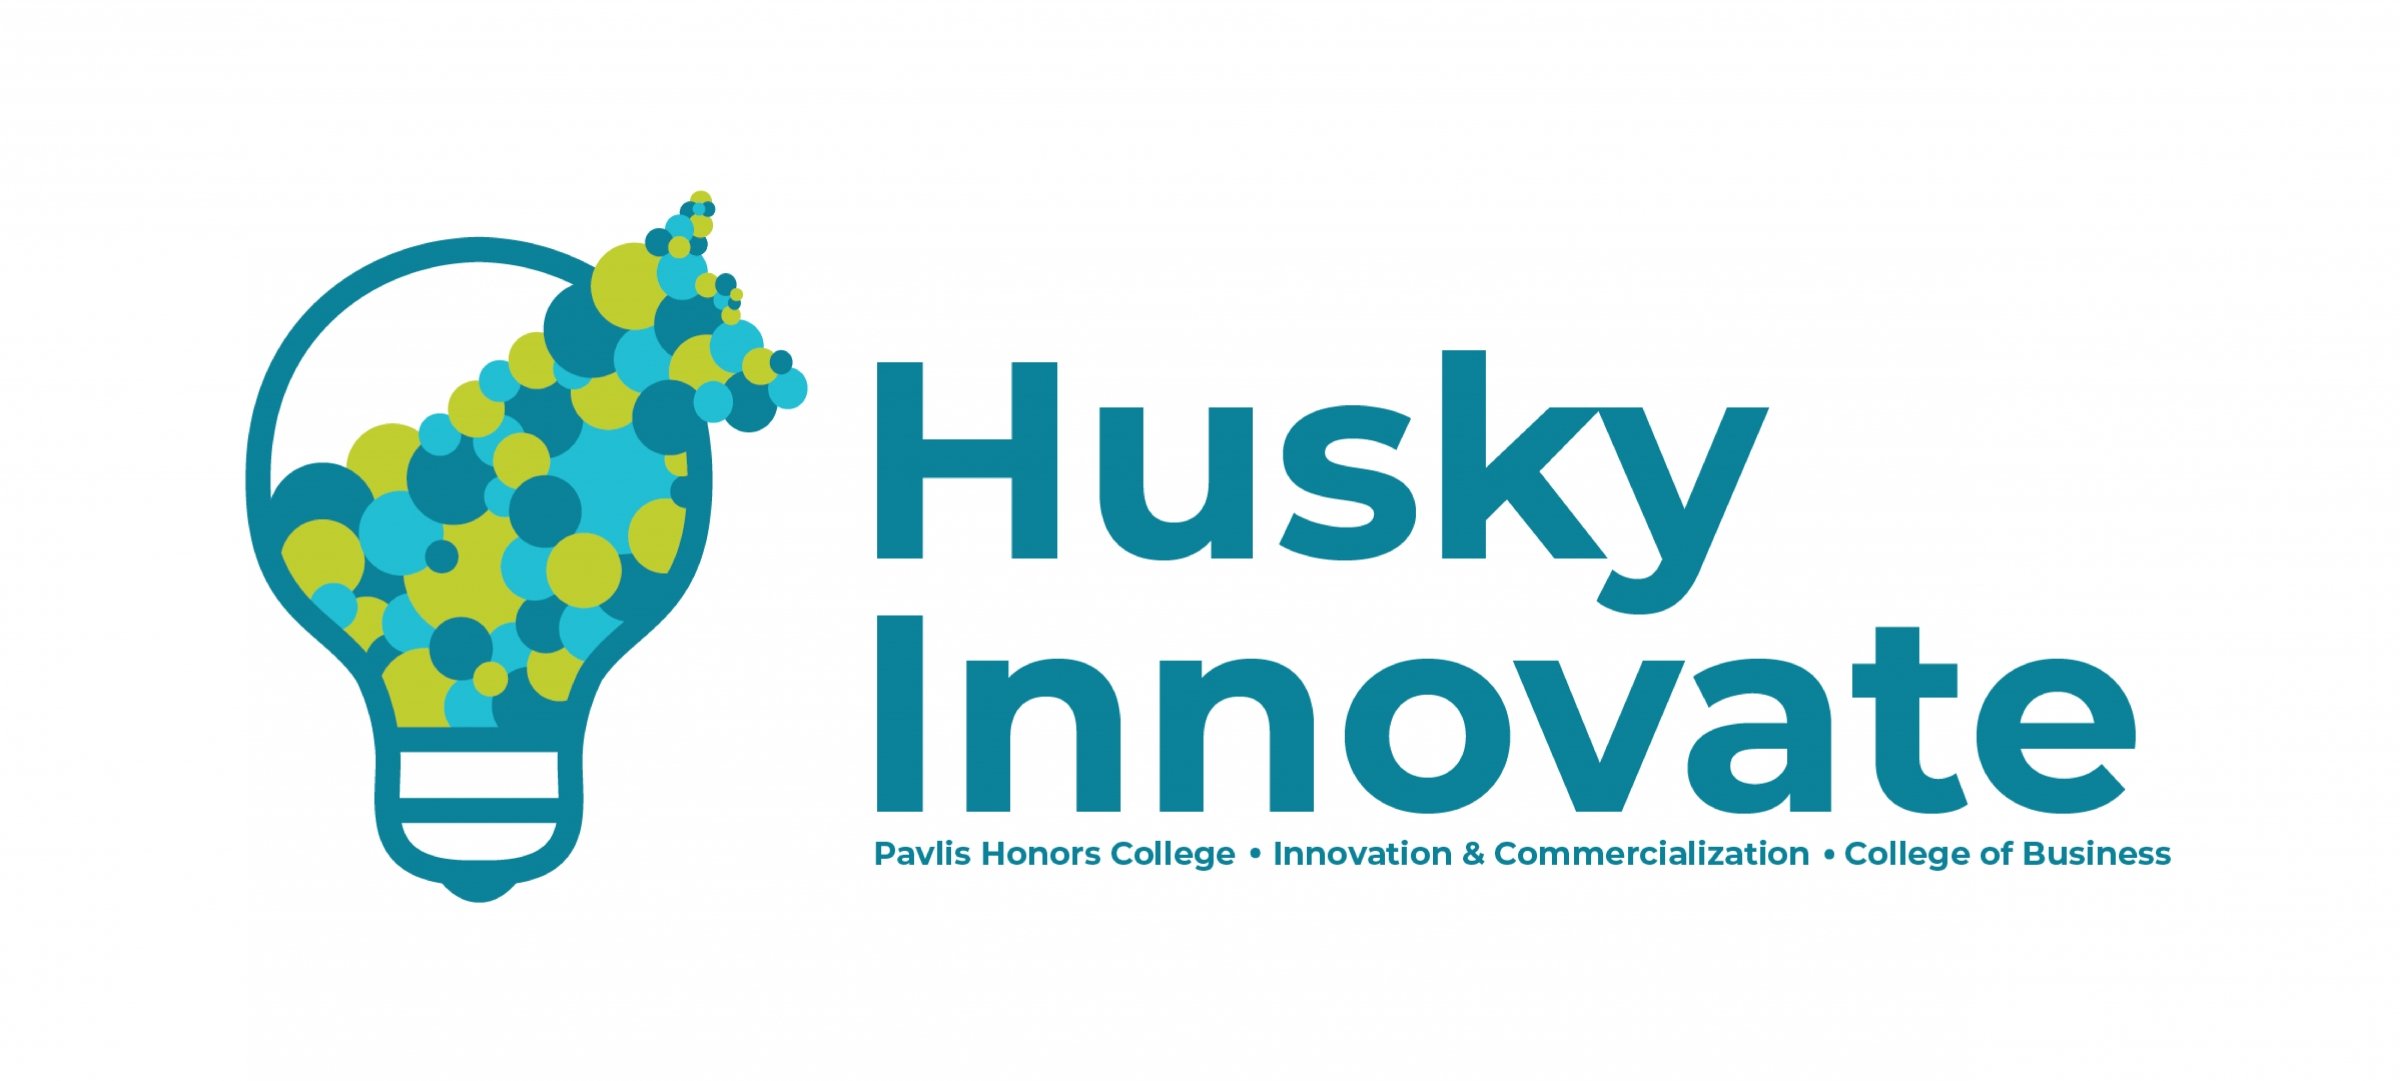 Husky Innovate - full collaboration call out